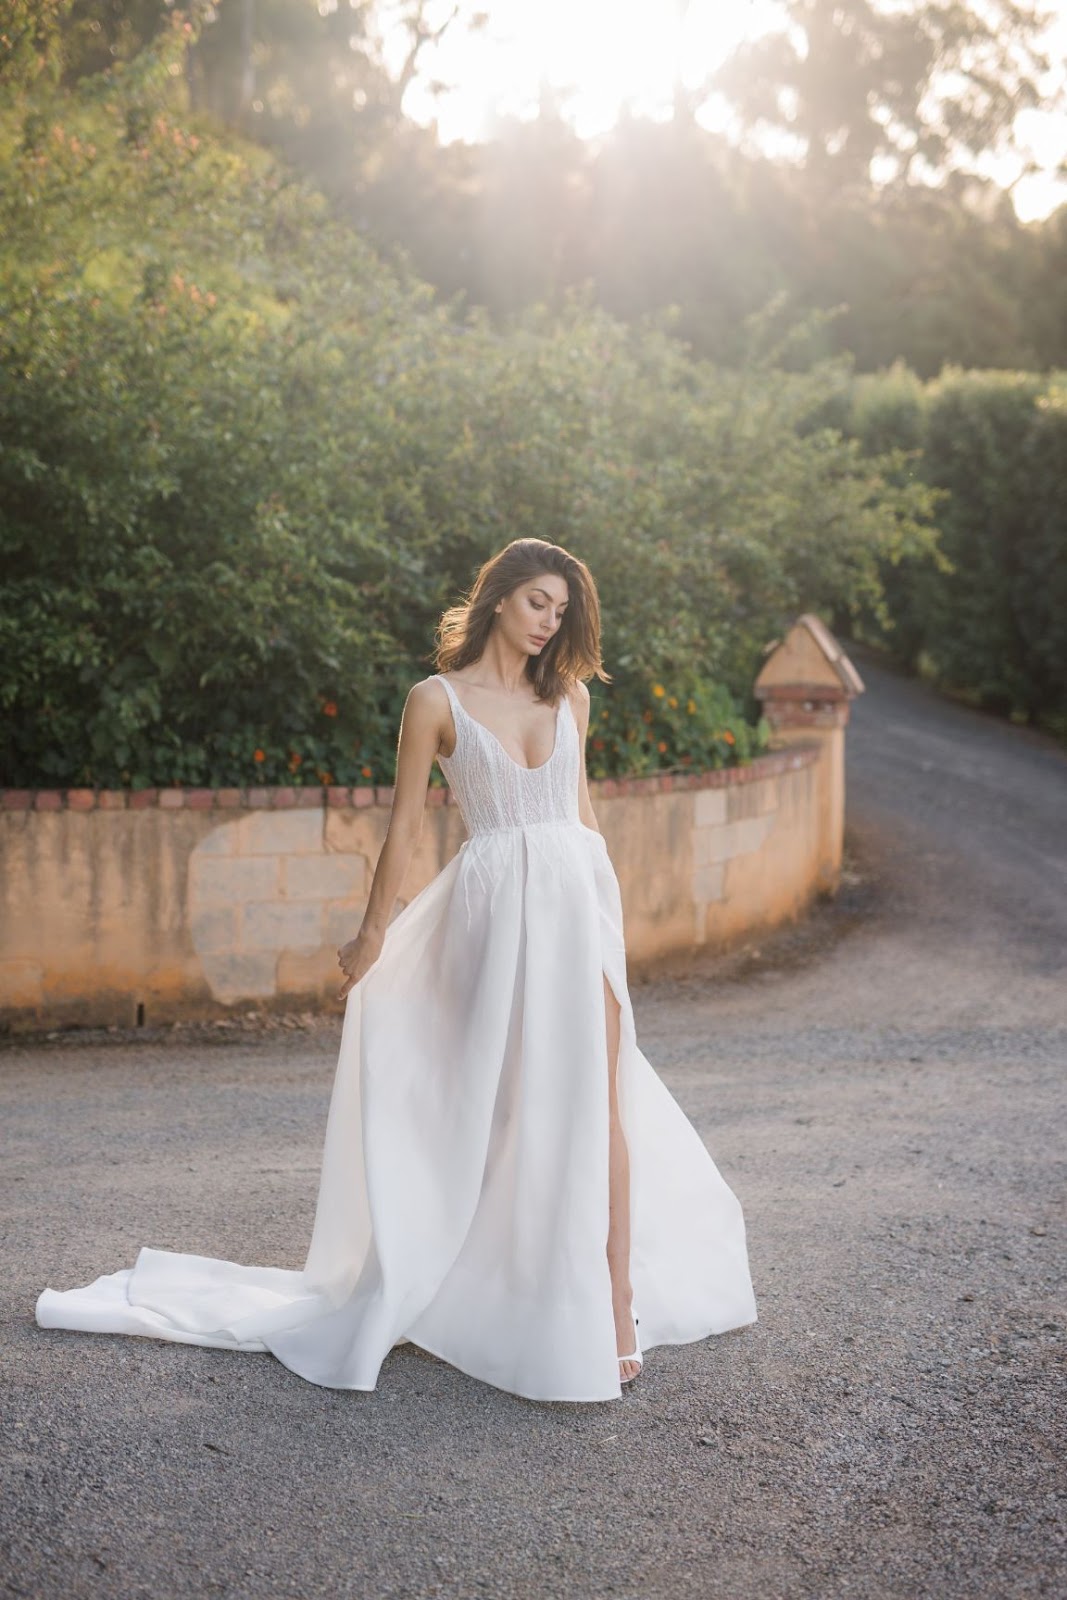 Images by @jennafaheywhite photography wedding dresses bridal gowns fashion hairstylist makeup artist